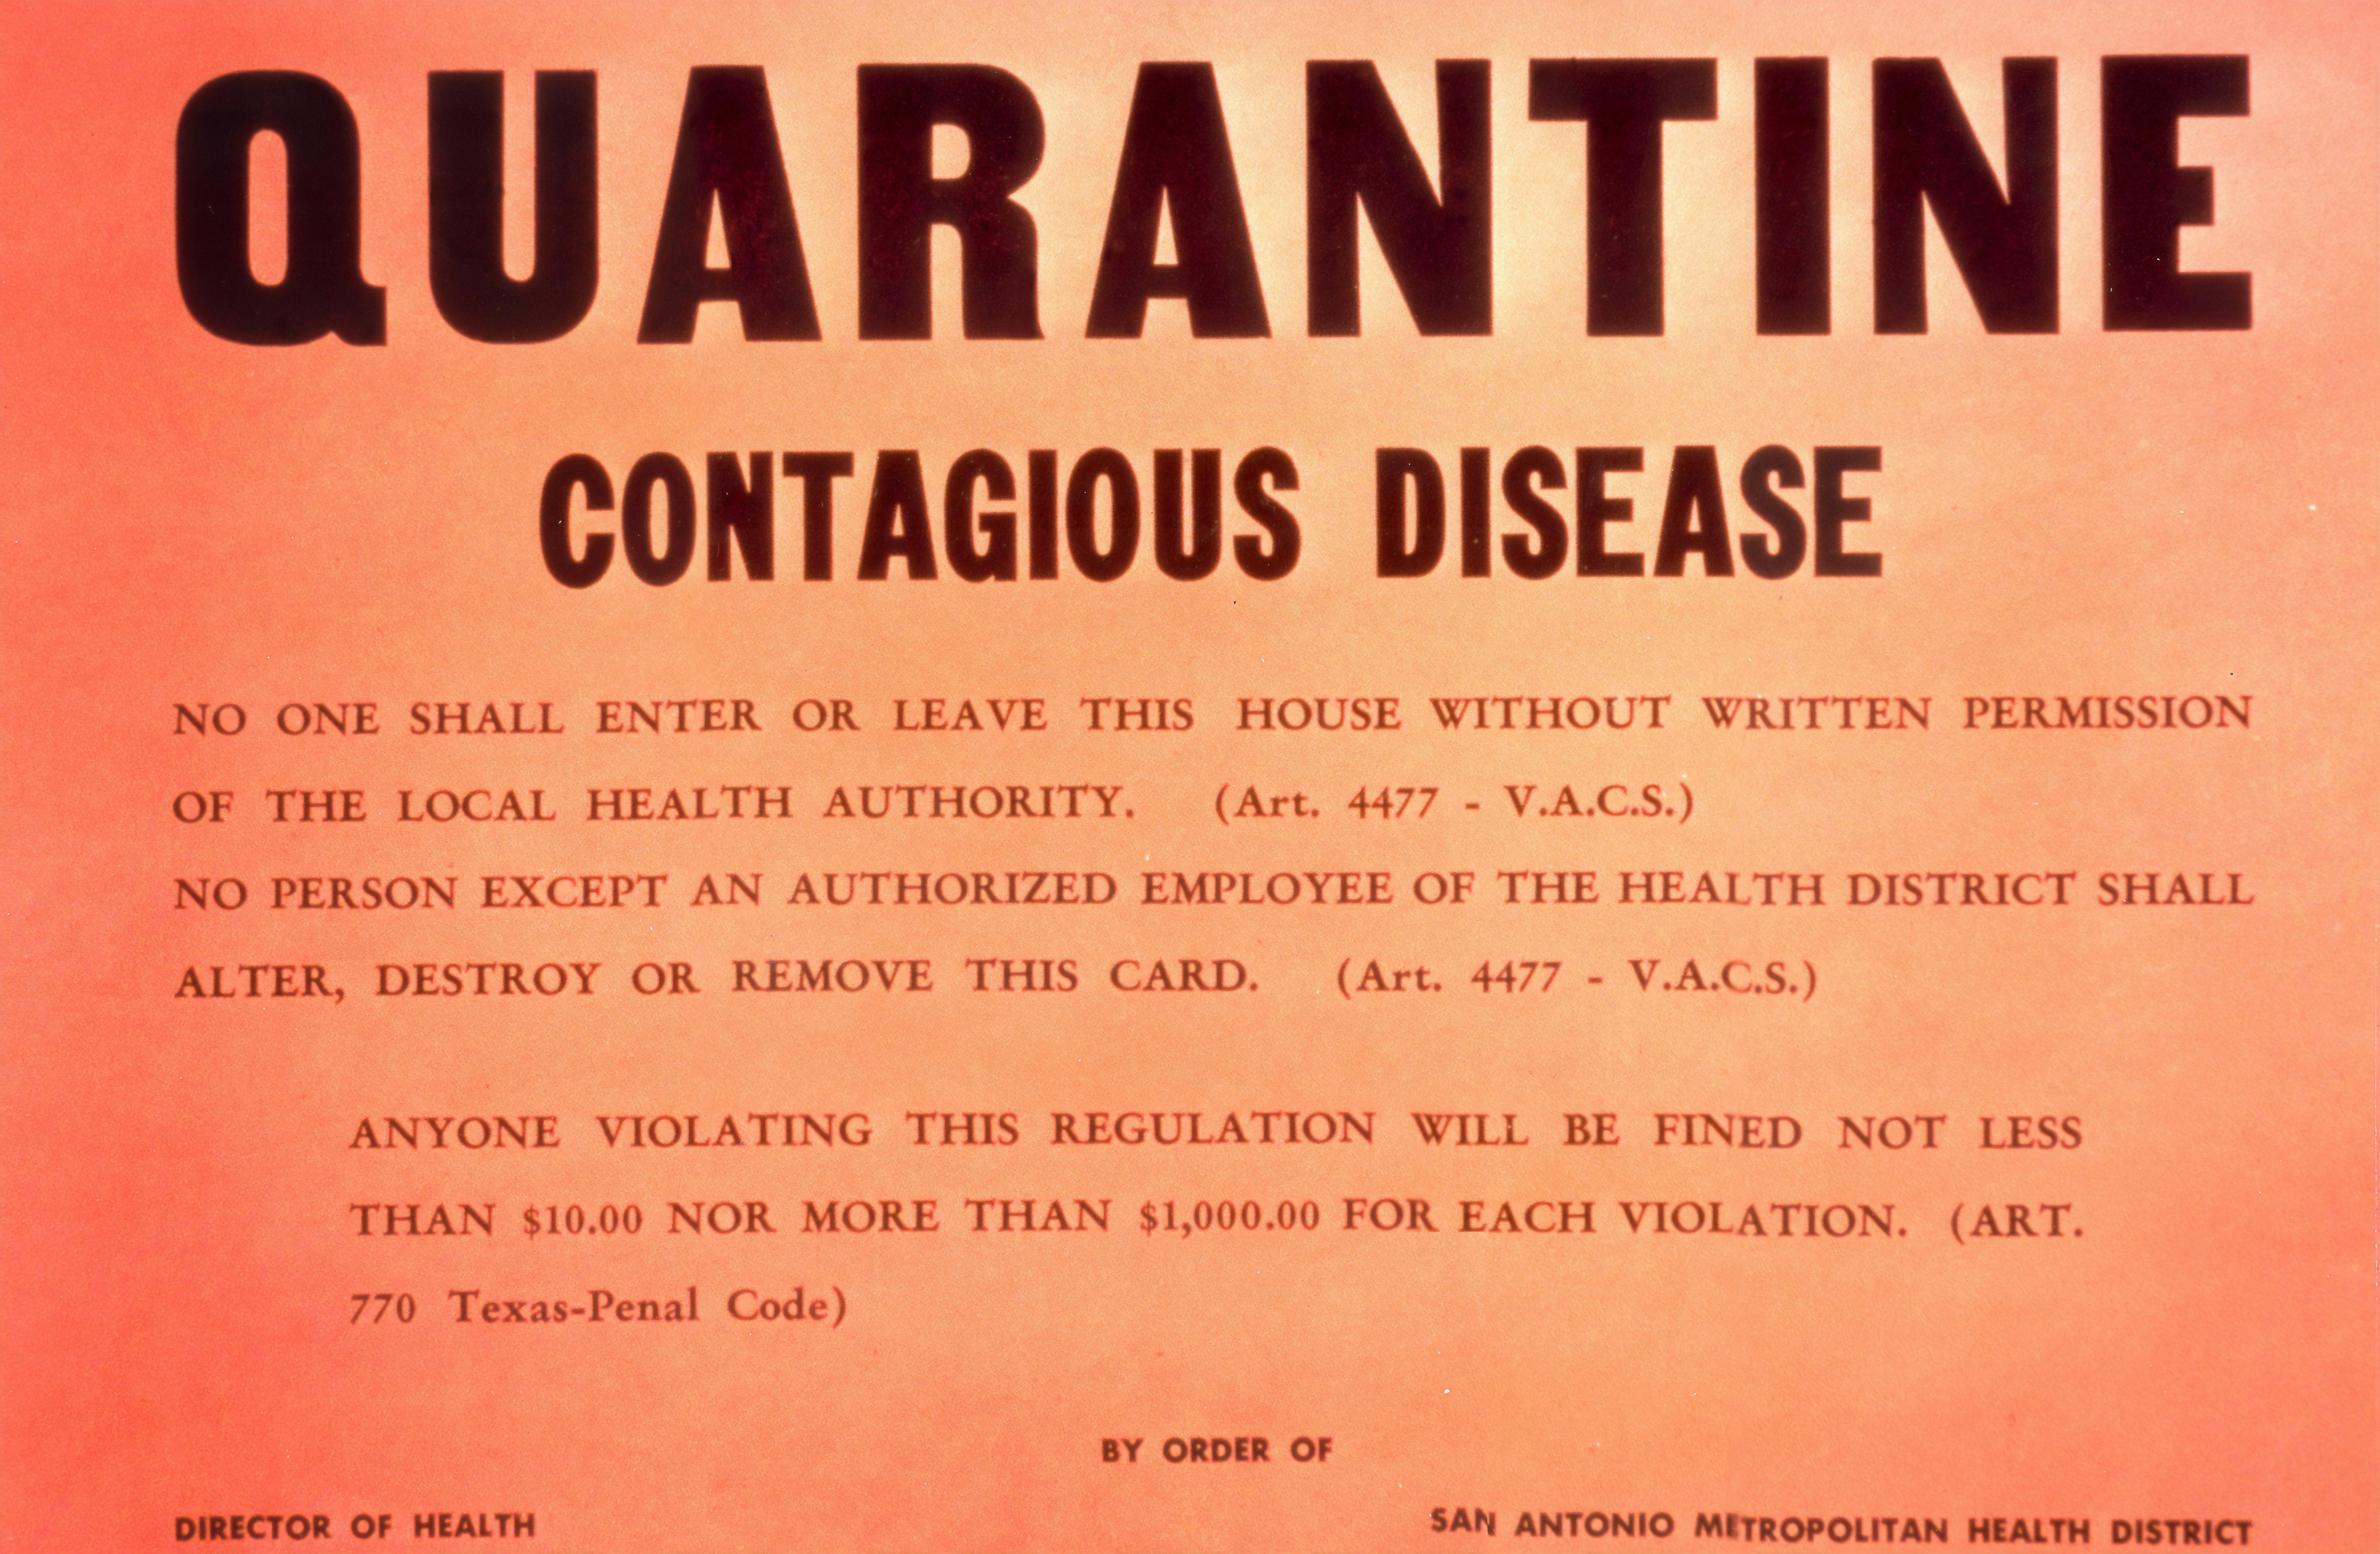 This historic image depicts a quarantine card, which would be used to notify people not to enter or leave a house that had been quarantined due to the presence of a contagious disease. This warning was under the auspices of the Director of Health, of the San Antonio Metropolitan Health District.